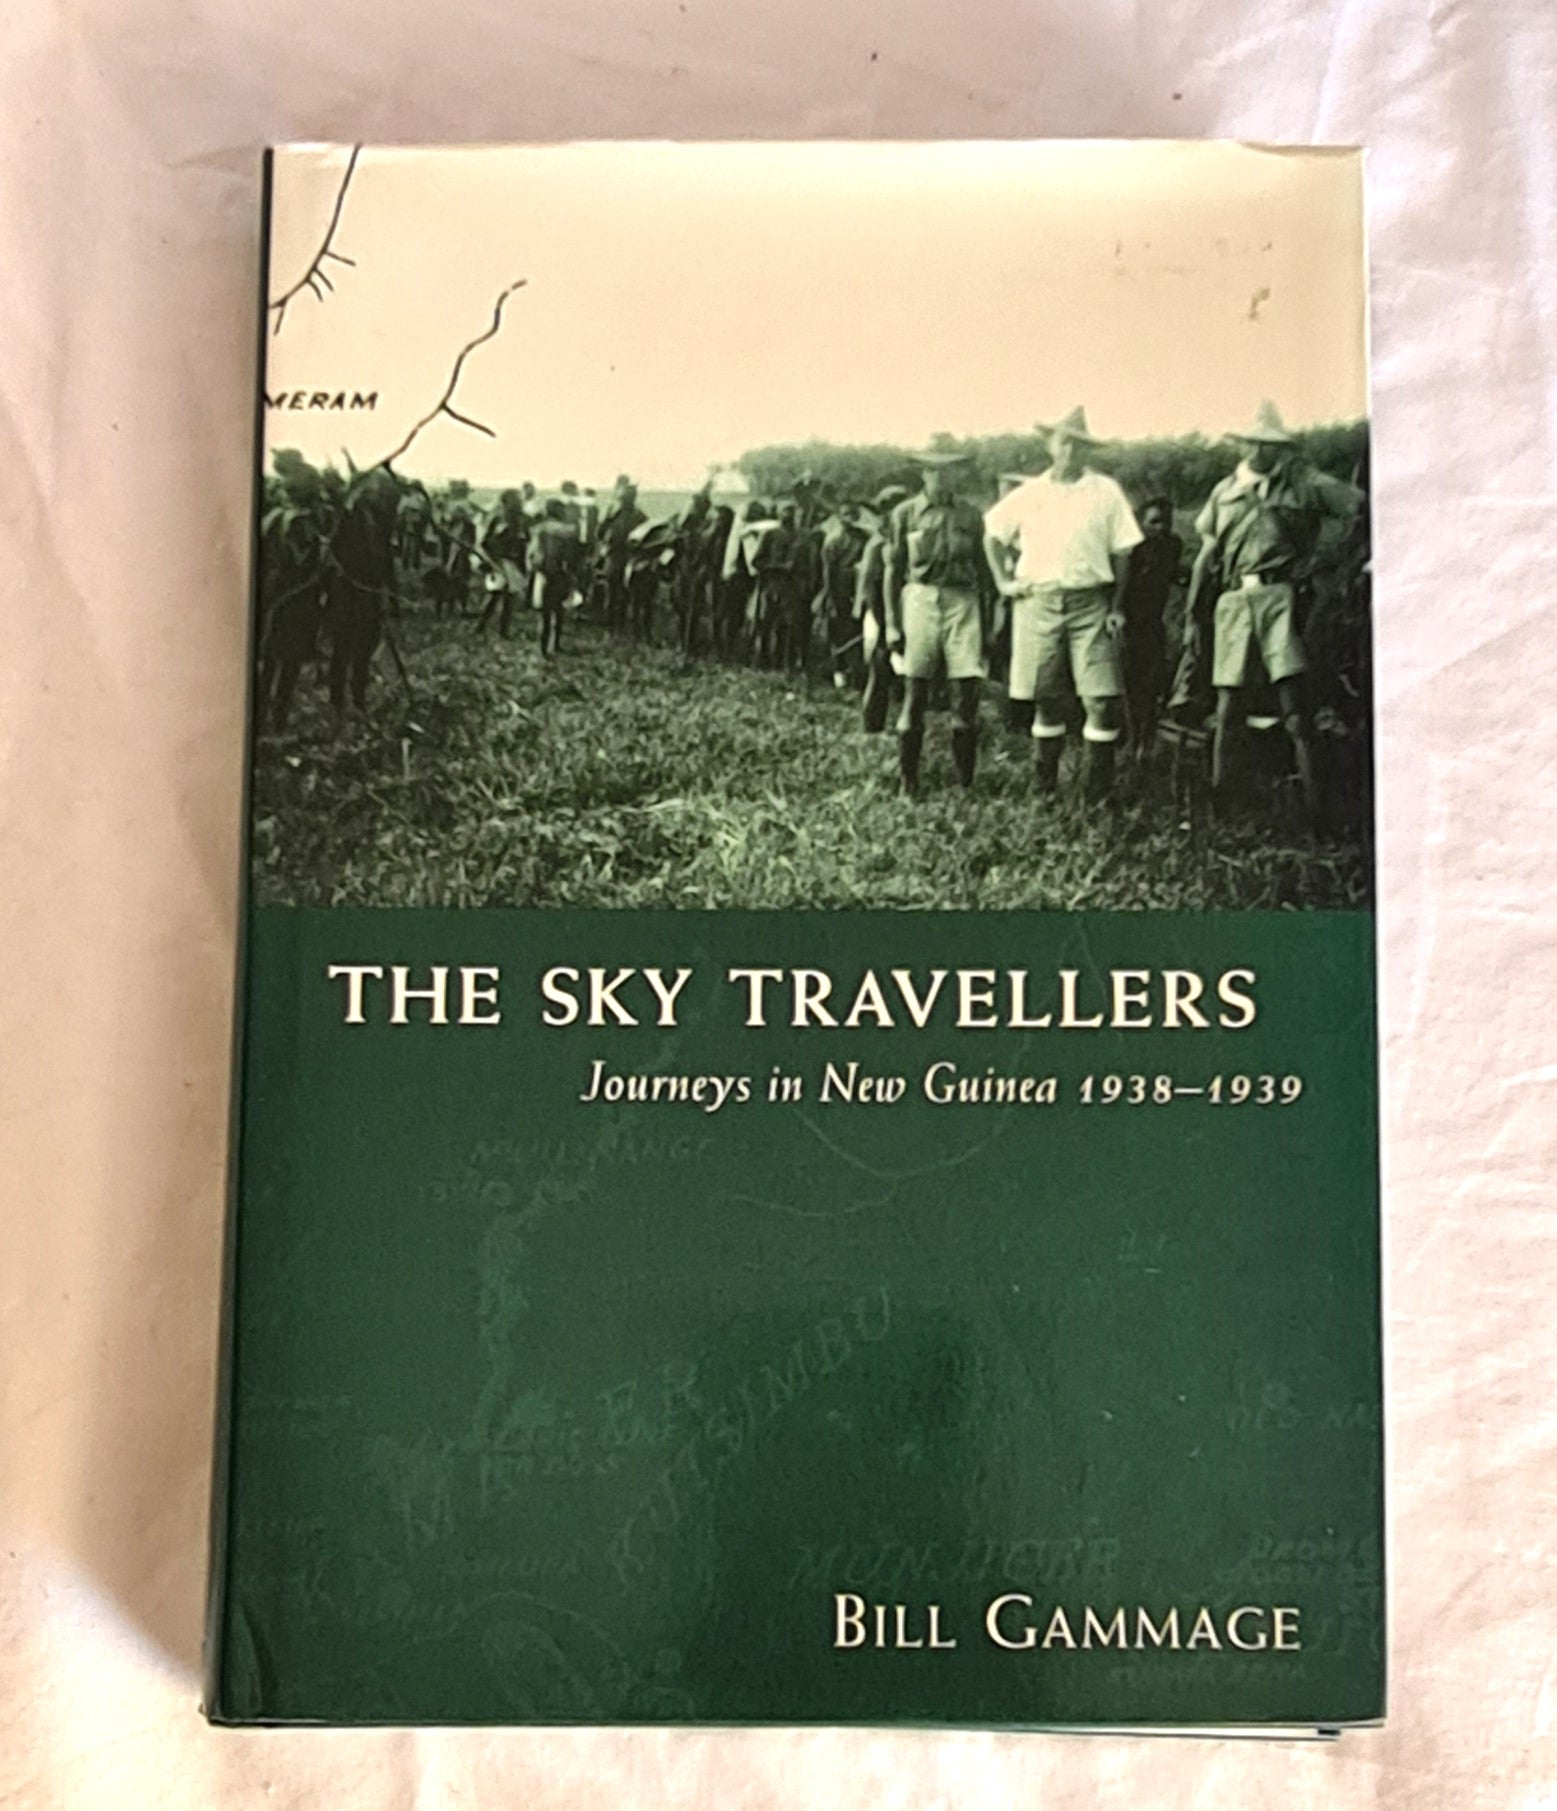 The Sky Travellers  Journeys in New Guinea 1938-1939  by Bill Gammage